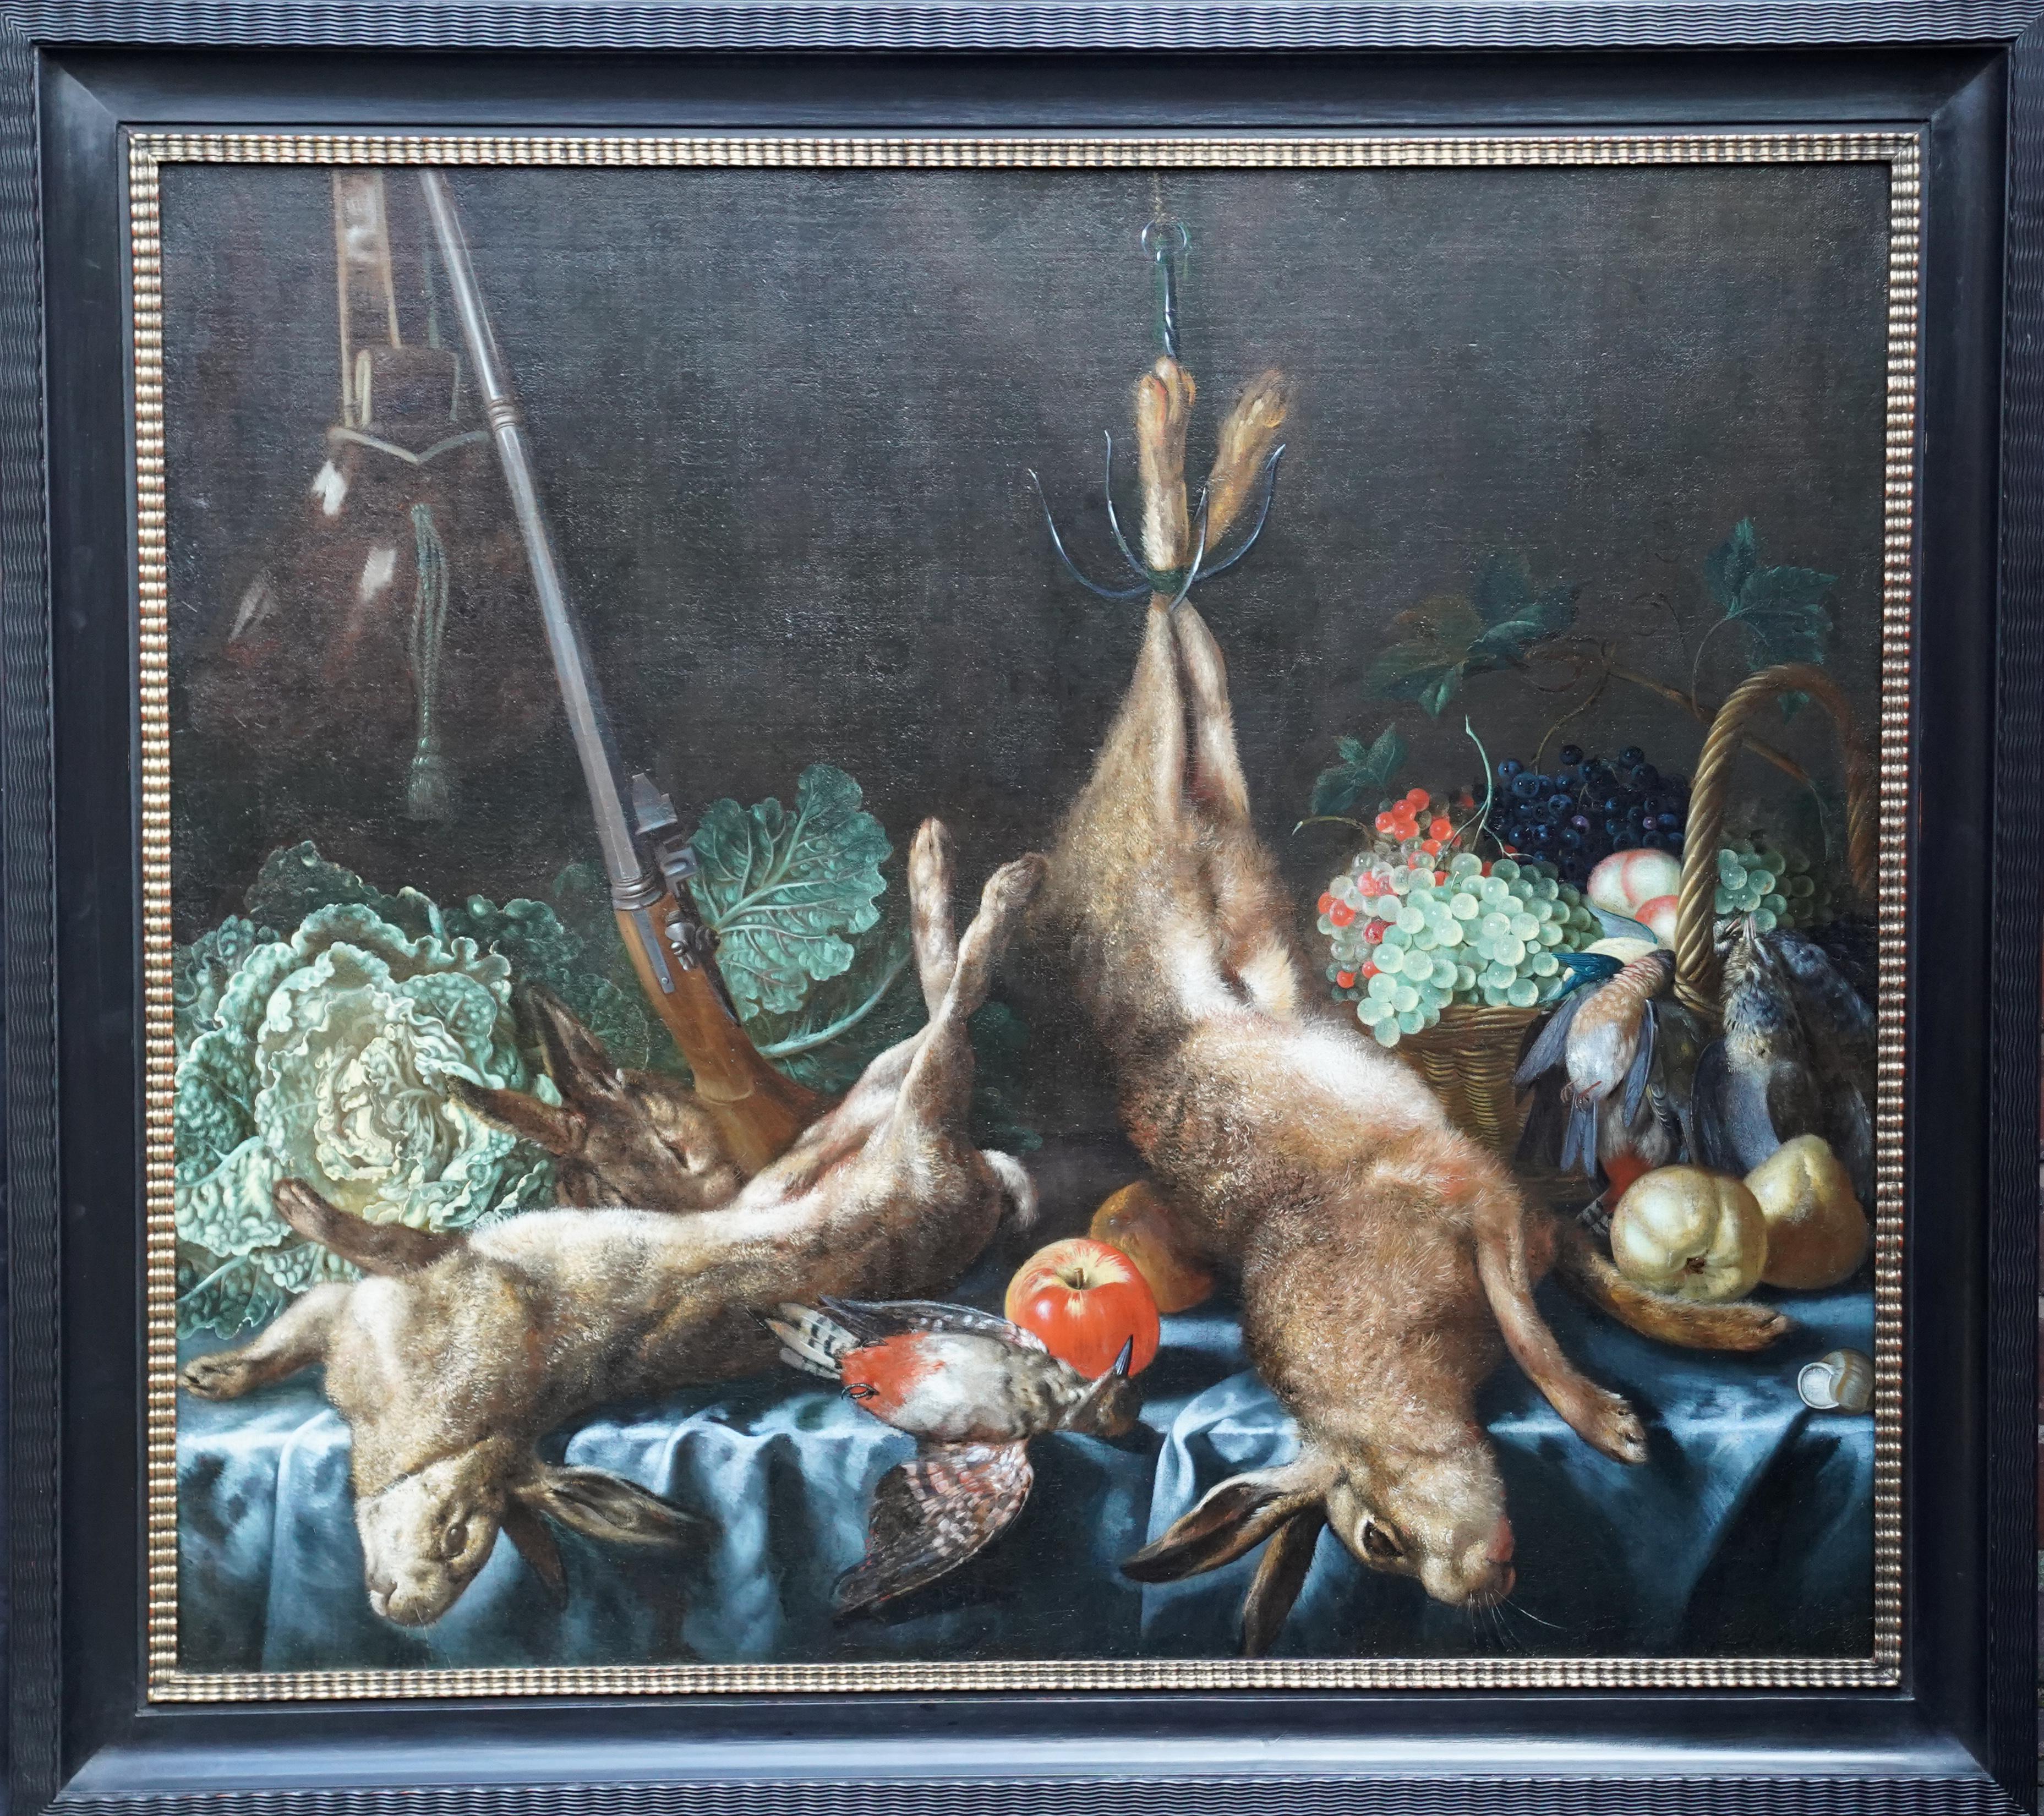 Pieter Boel Animal Painting - Still Life with Game, Fruit and Veg - Flemish 17thC Old Master art oil painting